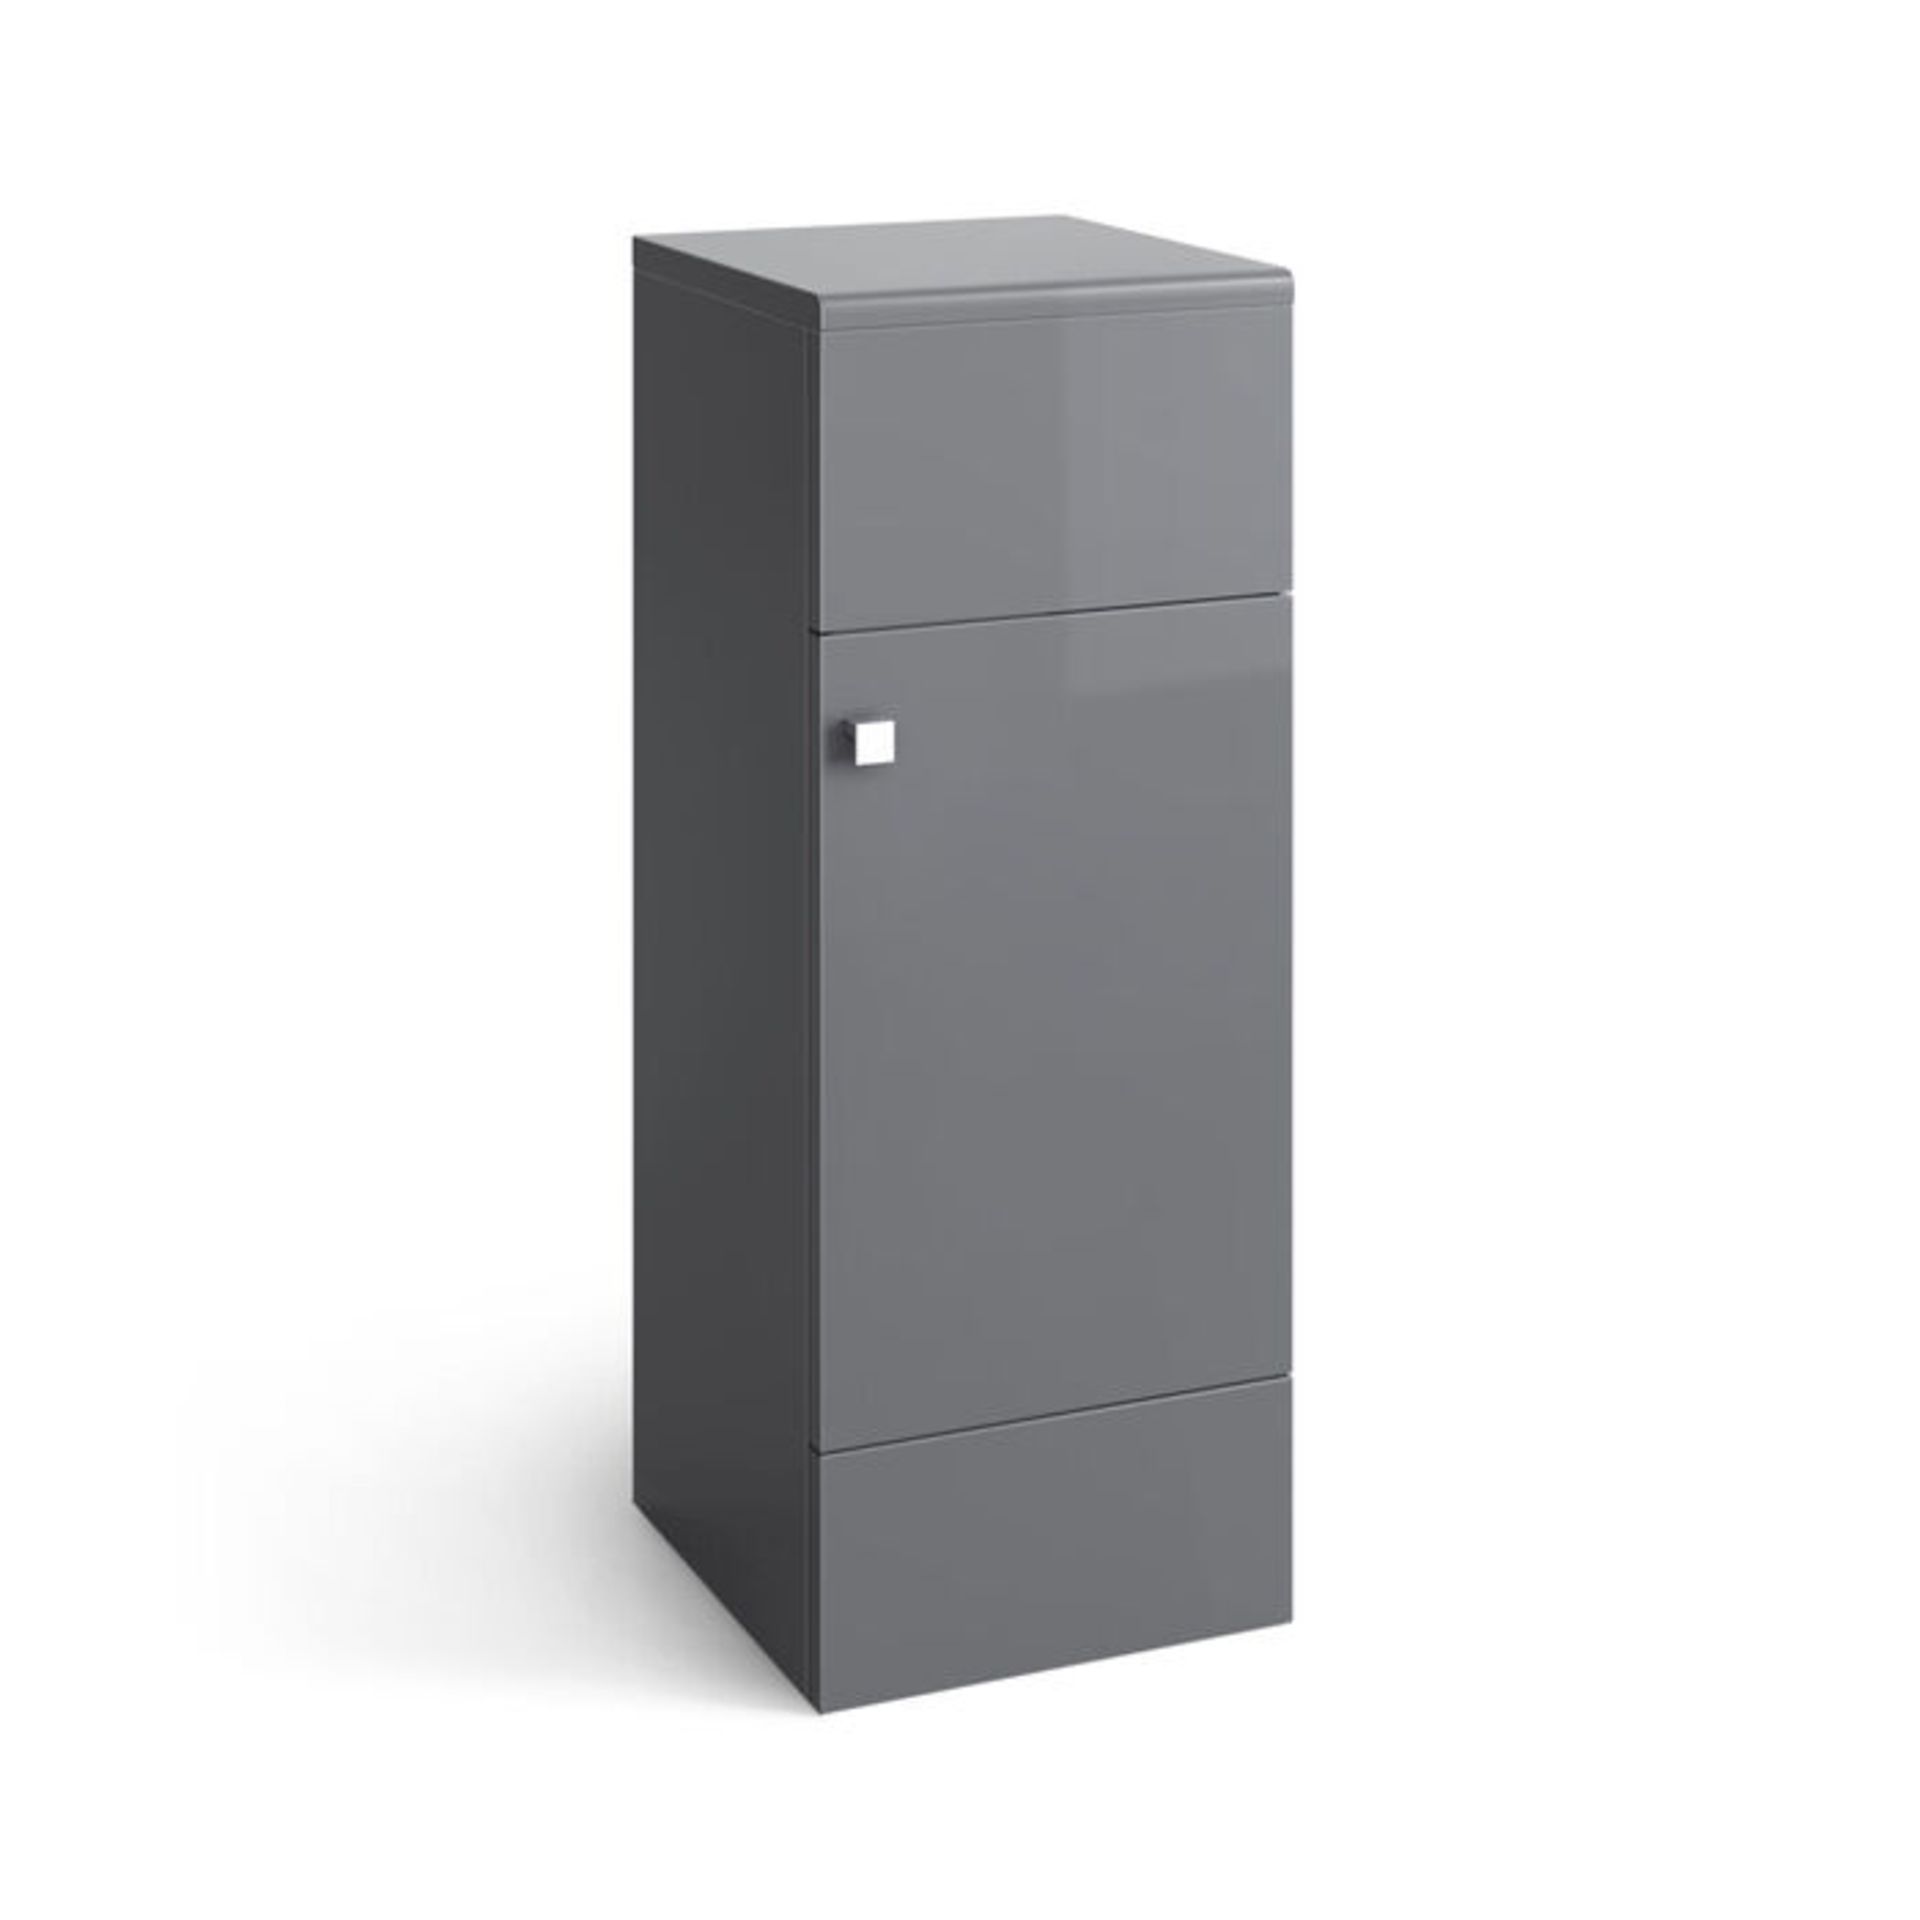 (DD121) 300mm Dayton Gloss Grey Small Side Cabinet Unit. RRP £209.99. Our compact unit offers ... - Image 4 of 4